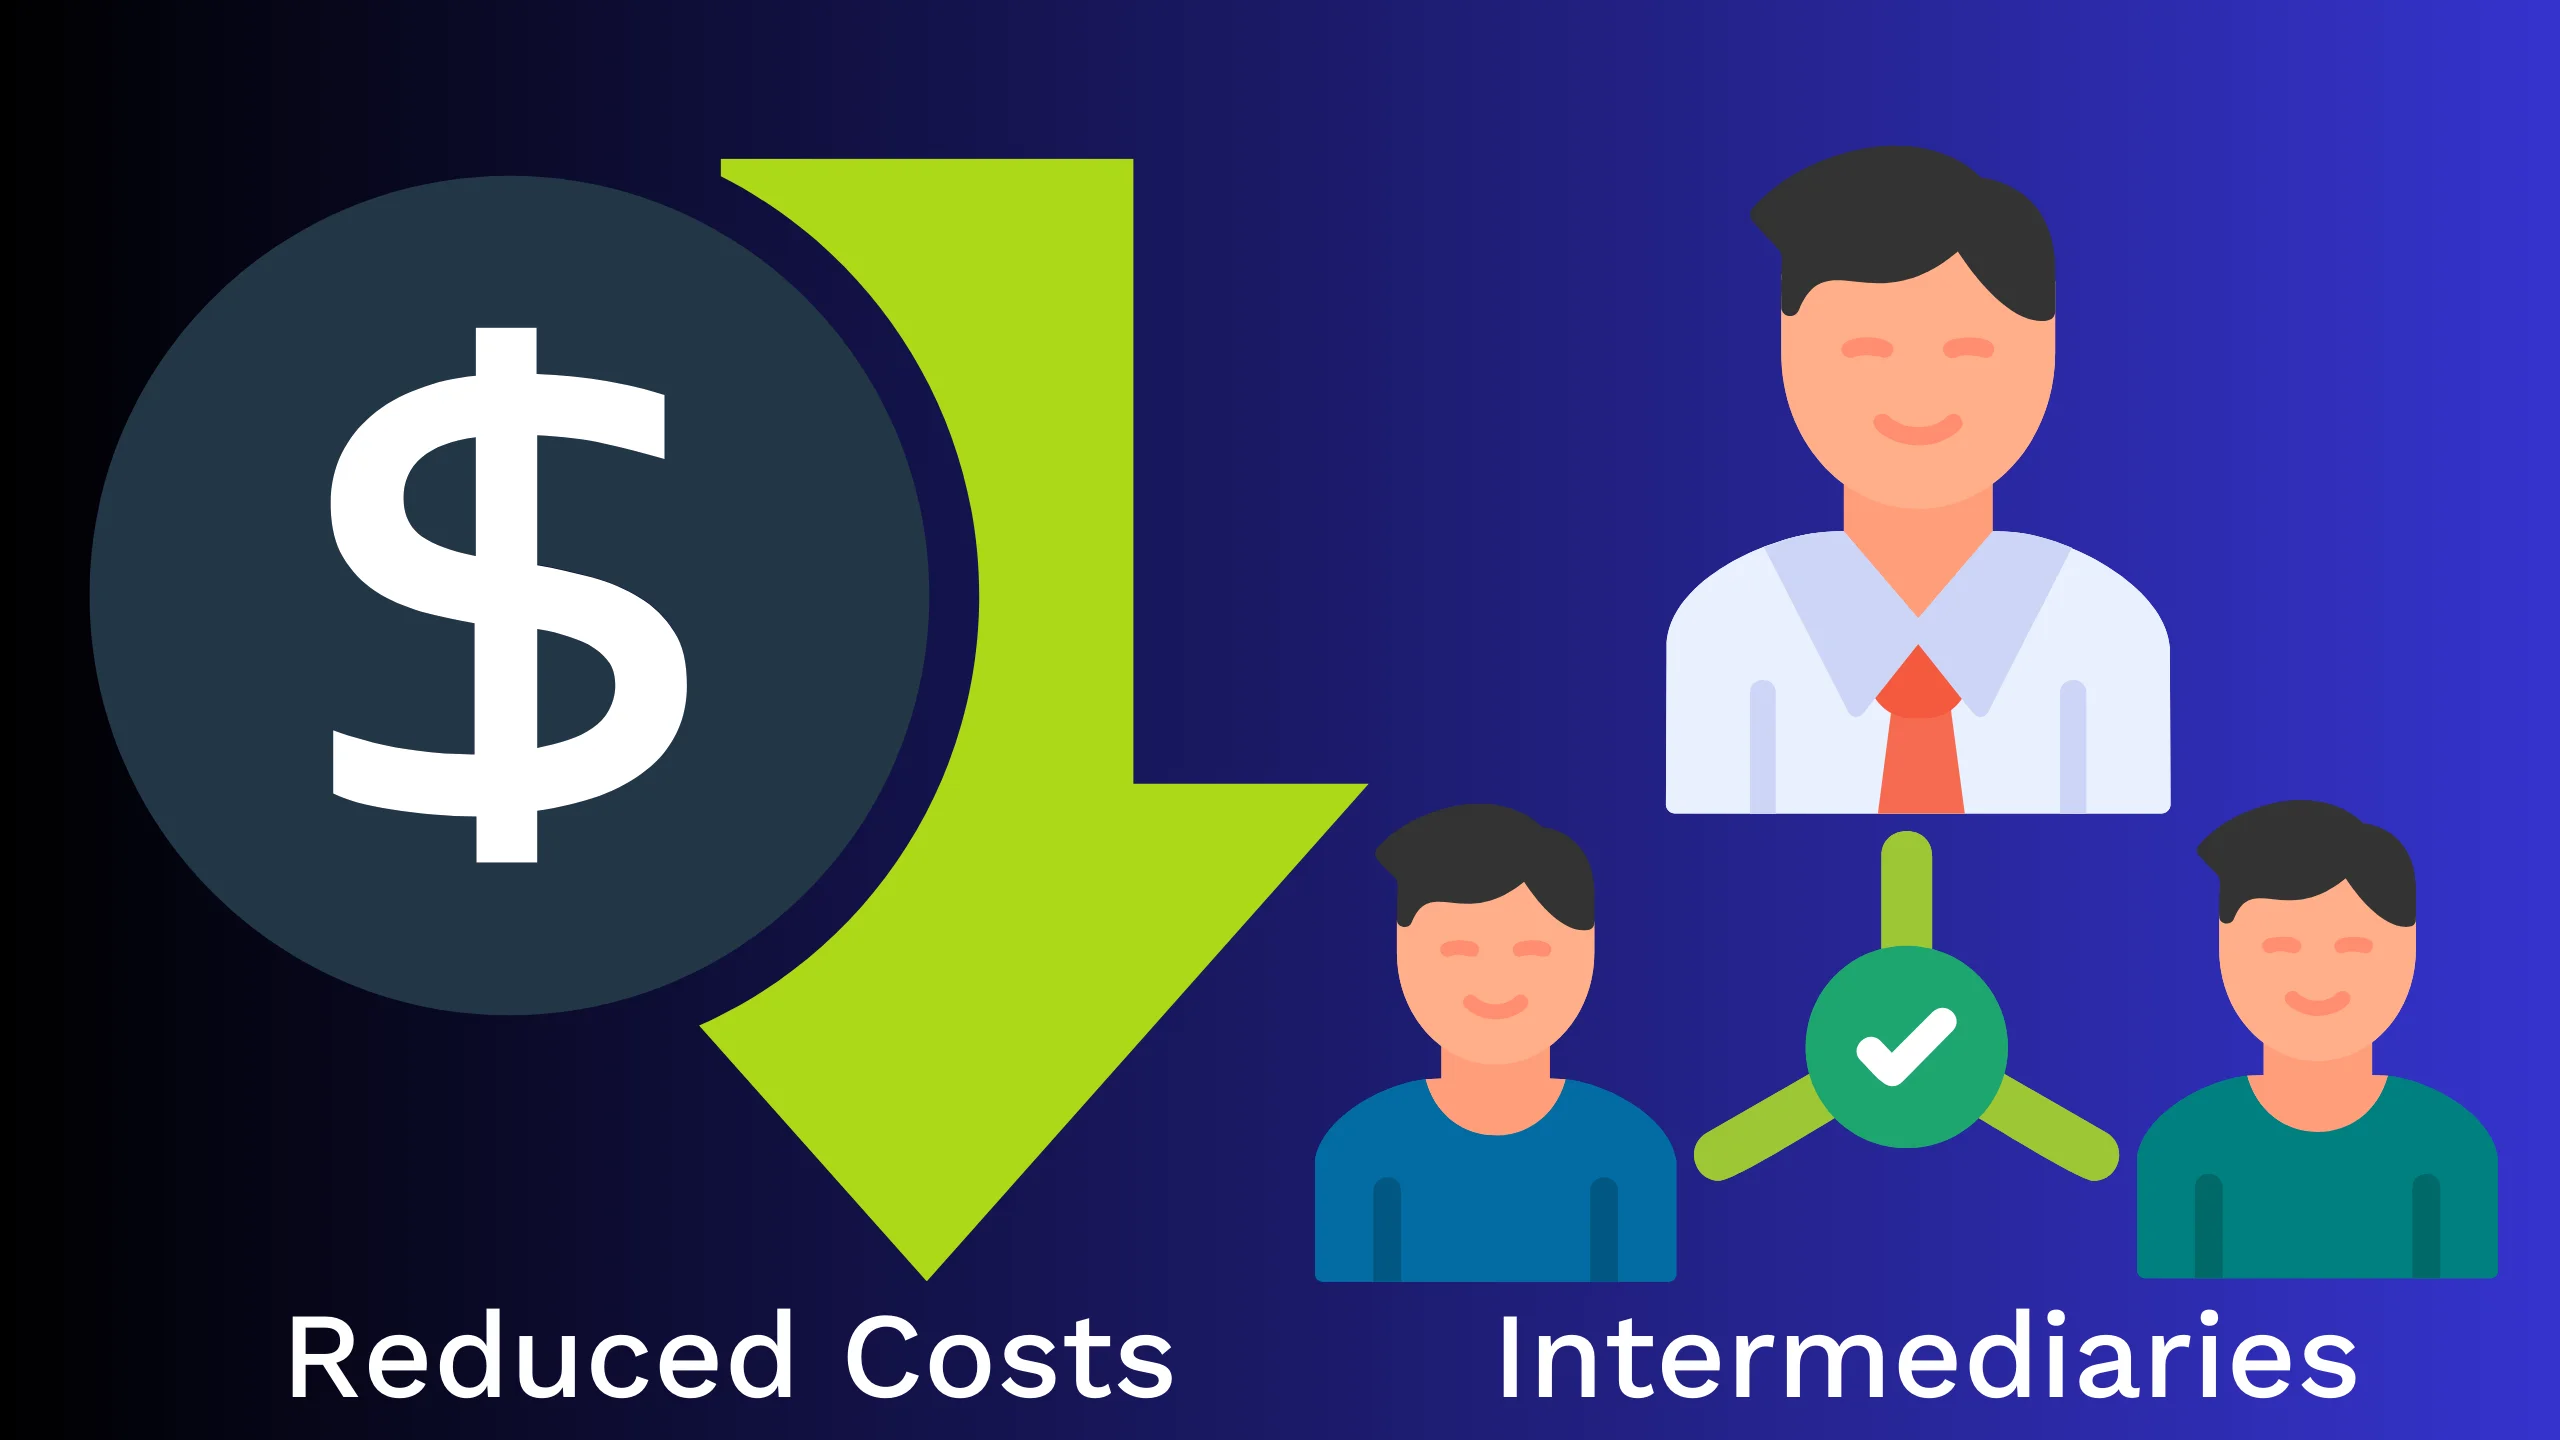 Reduced Costs and Intermediaries: Blockchain technology in ICOs minimizes costs by eliminating the need for intermediaries, streamlining the fundraising process.